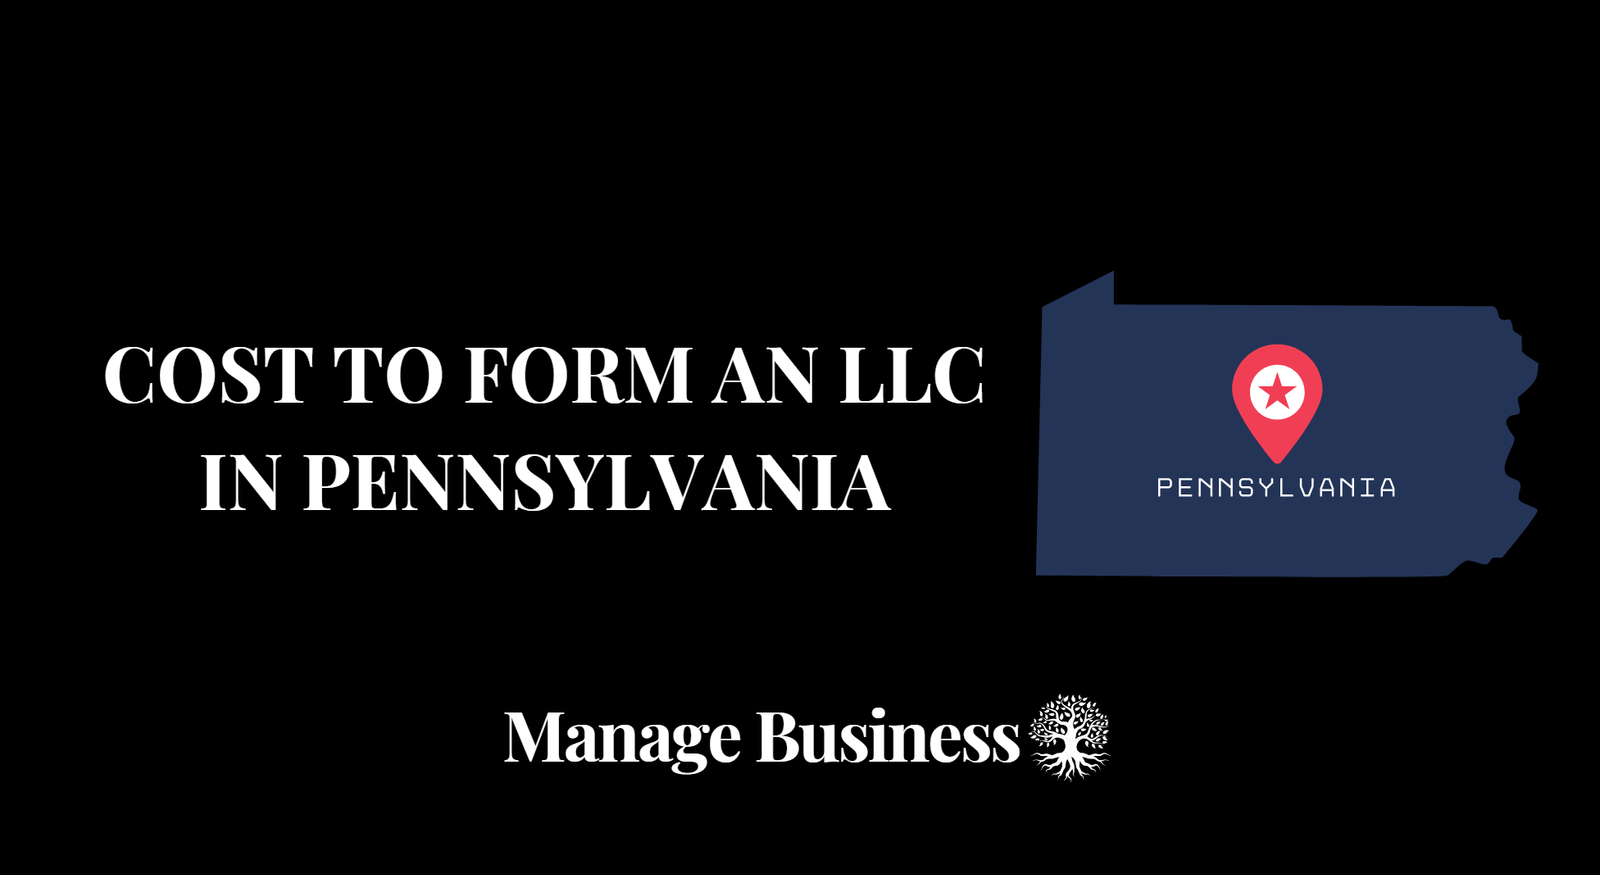 Cost to Form an LLC in Pennsylvania: PA LLC Cost Guide - Manage Business